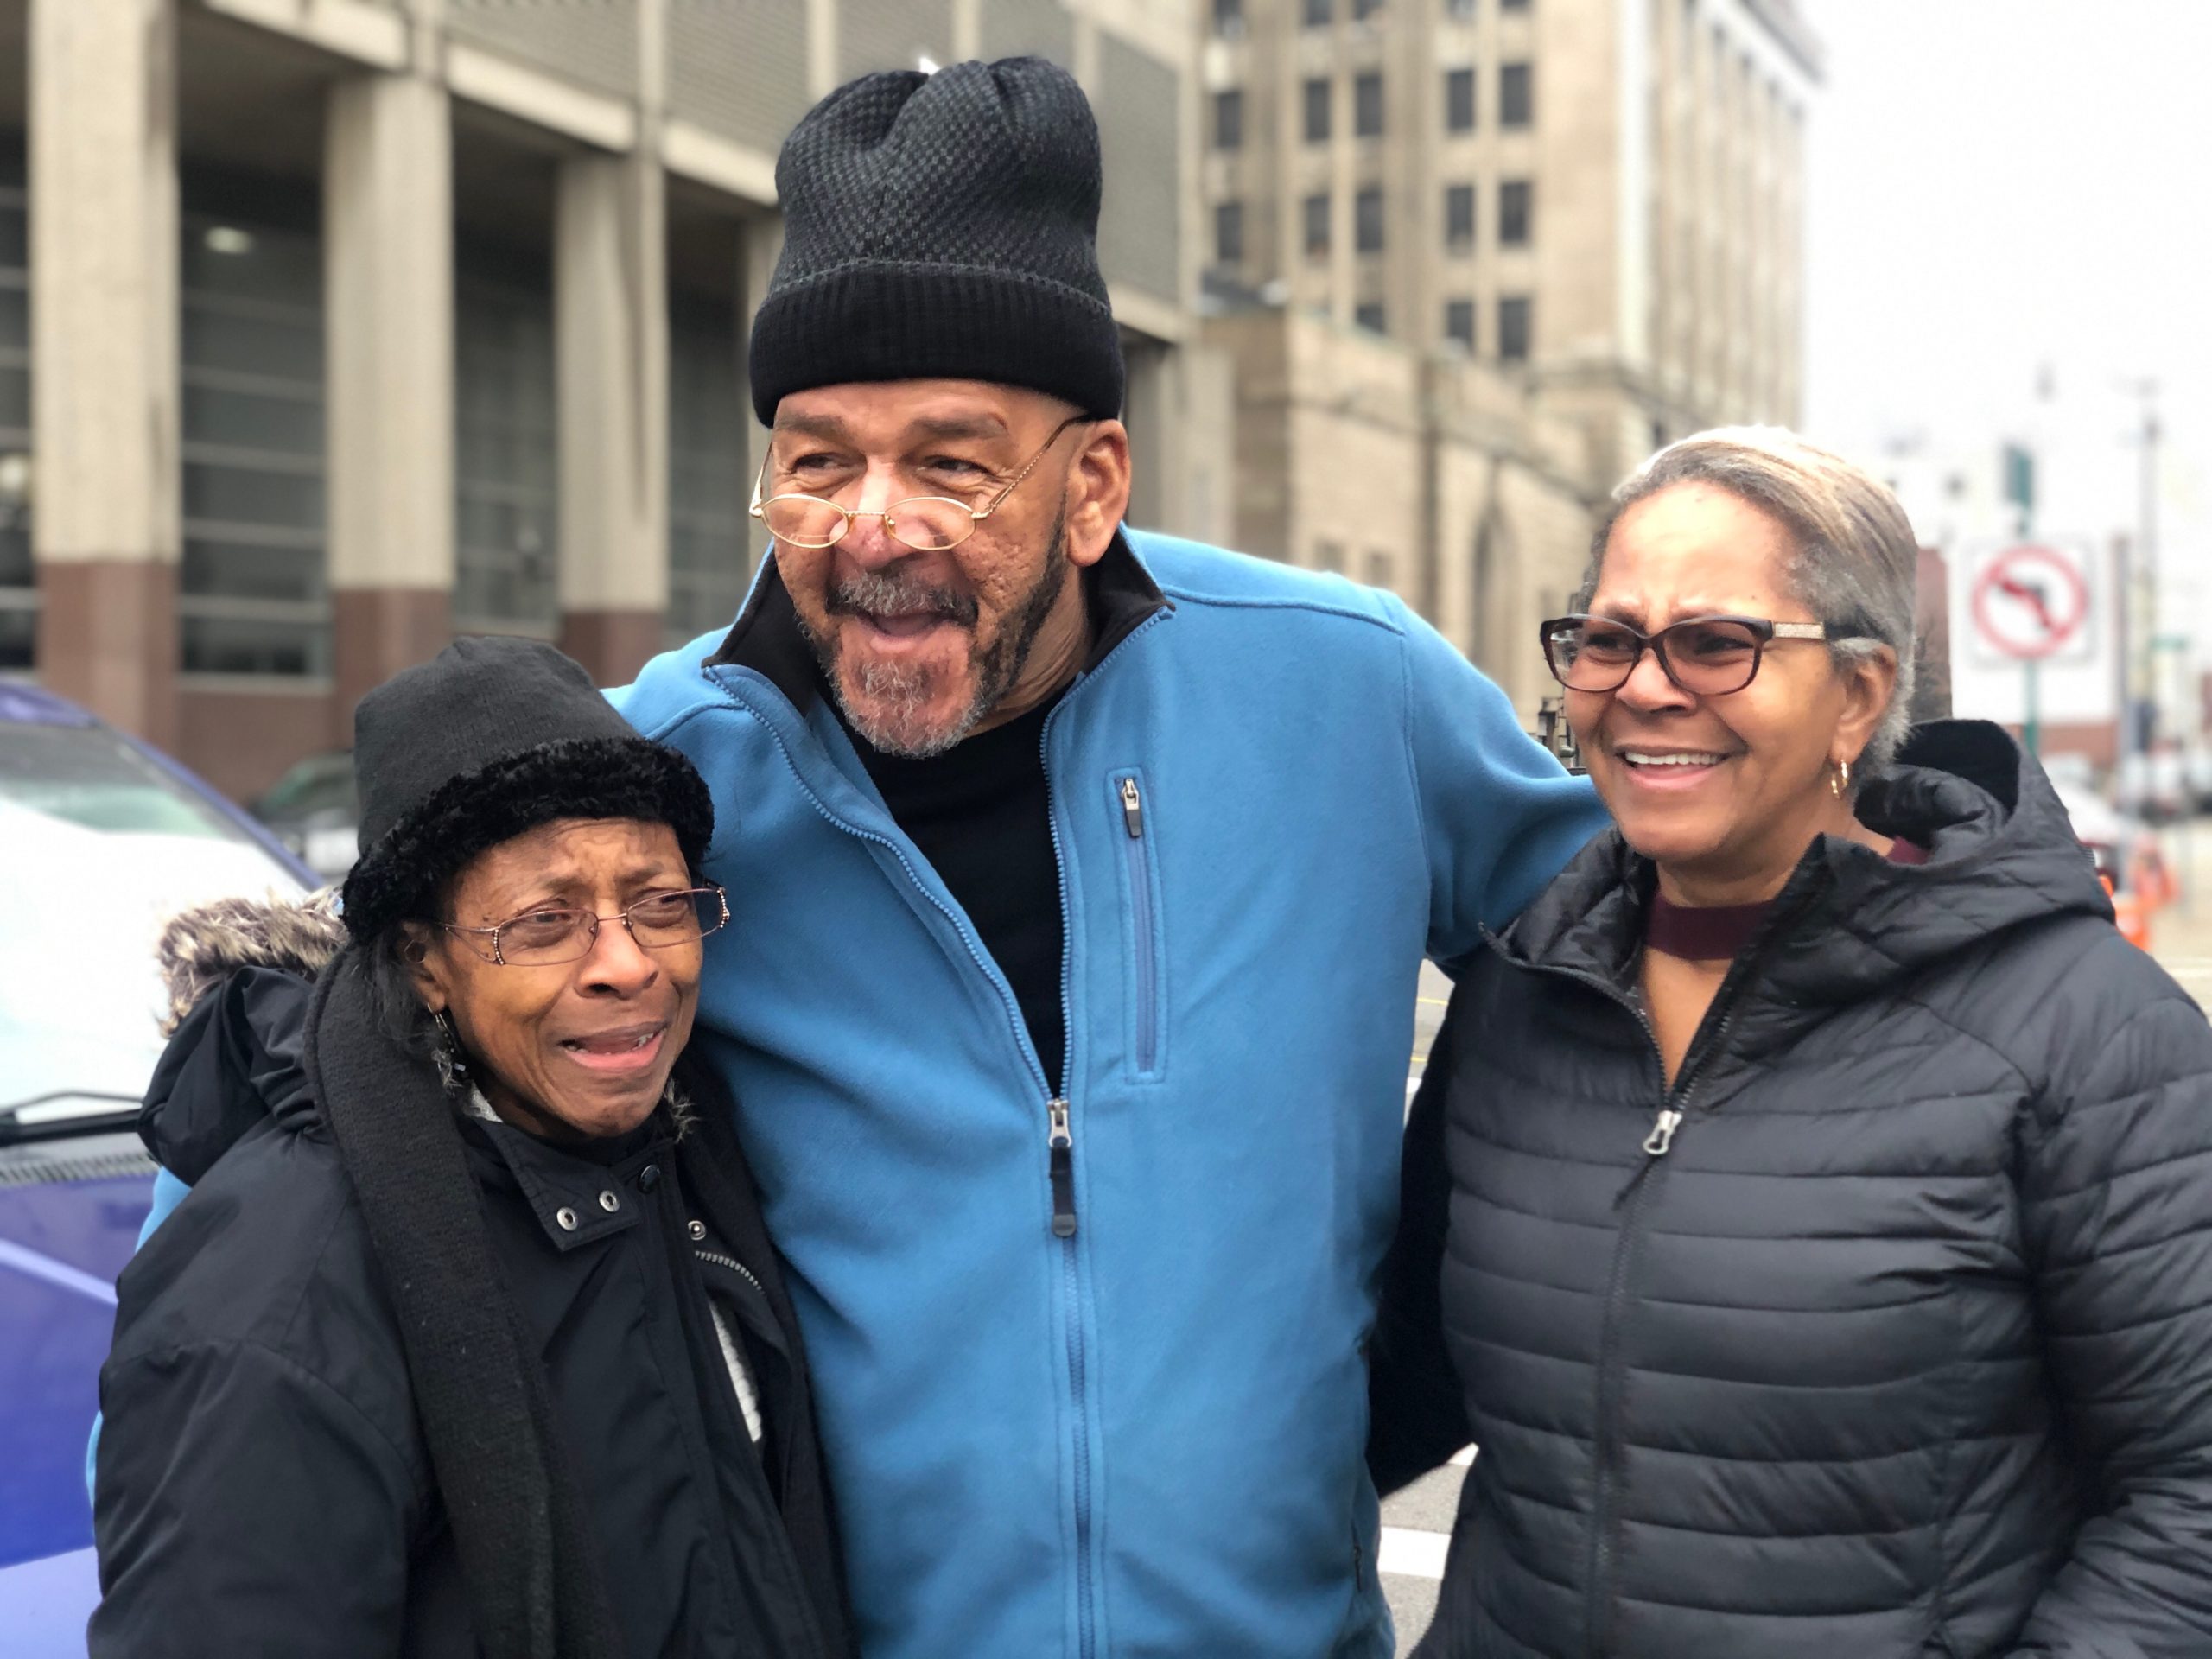 Gerry Thomas and his sisters Lois and Mary moments after his exoneration and release from 29 years in prison on January 13, 2020. Photo by Suzy Salamy/Innocence Project.